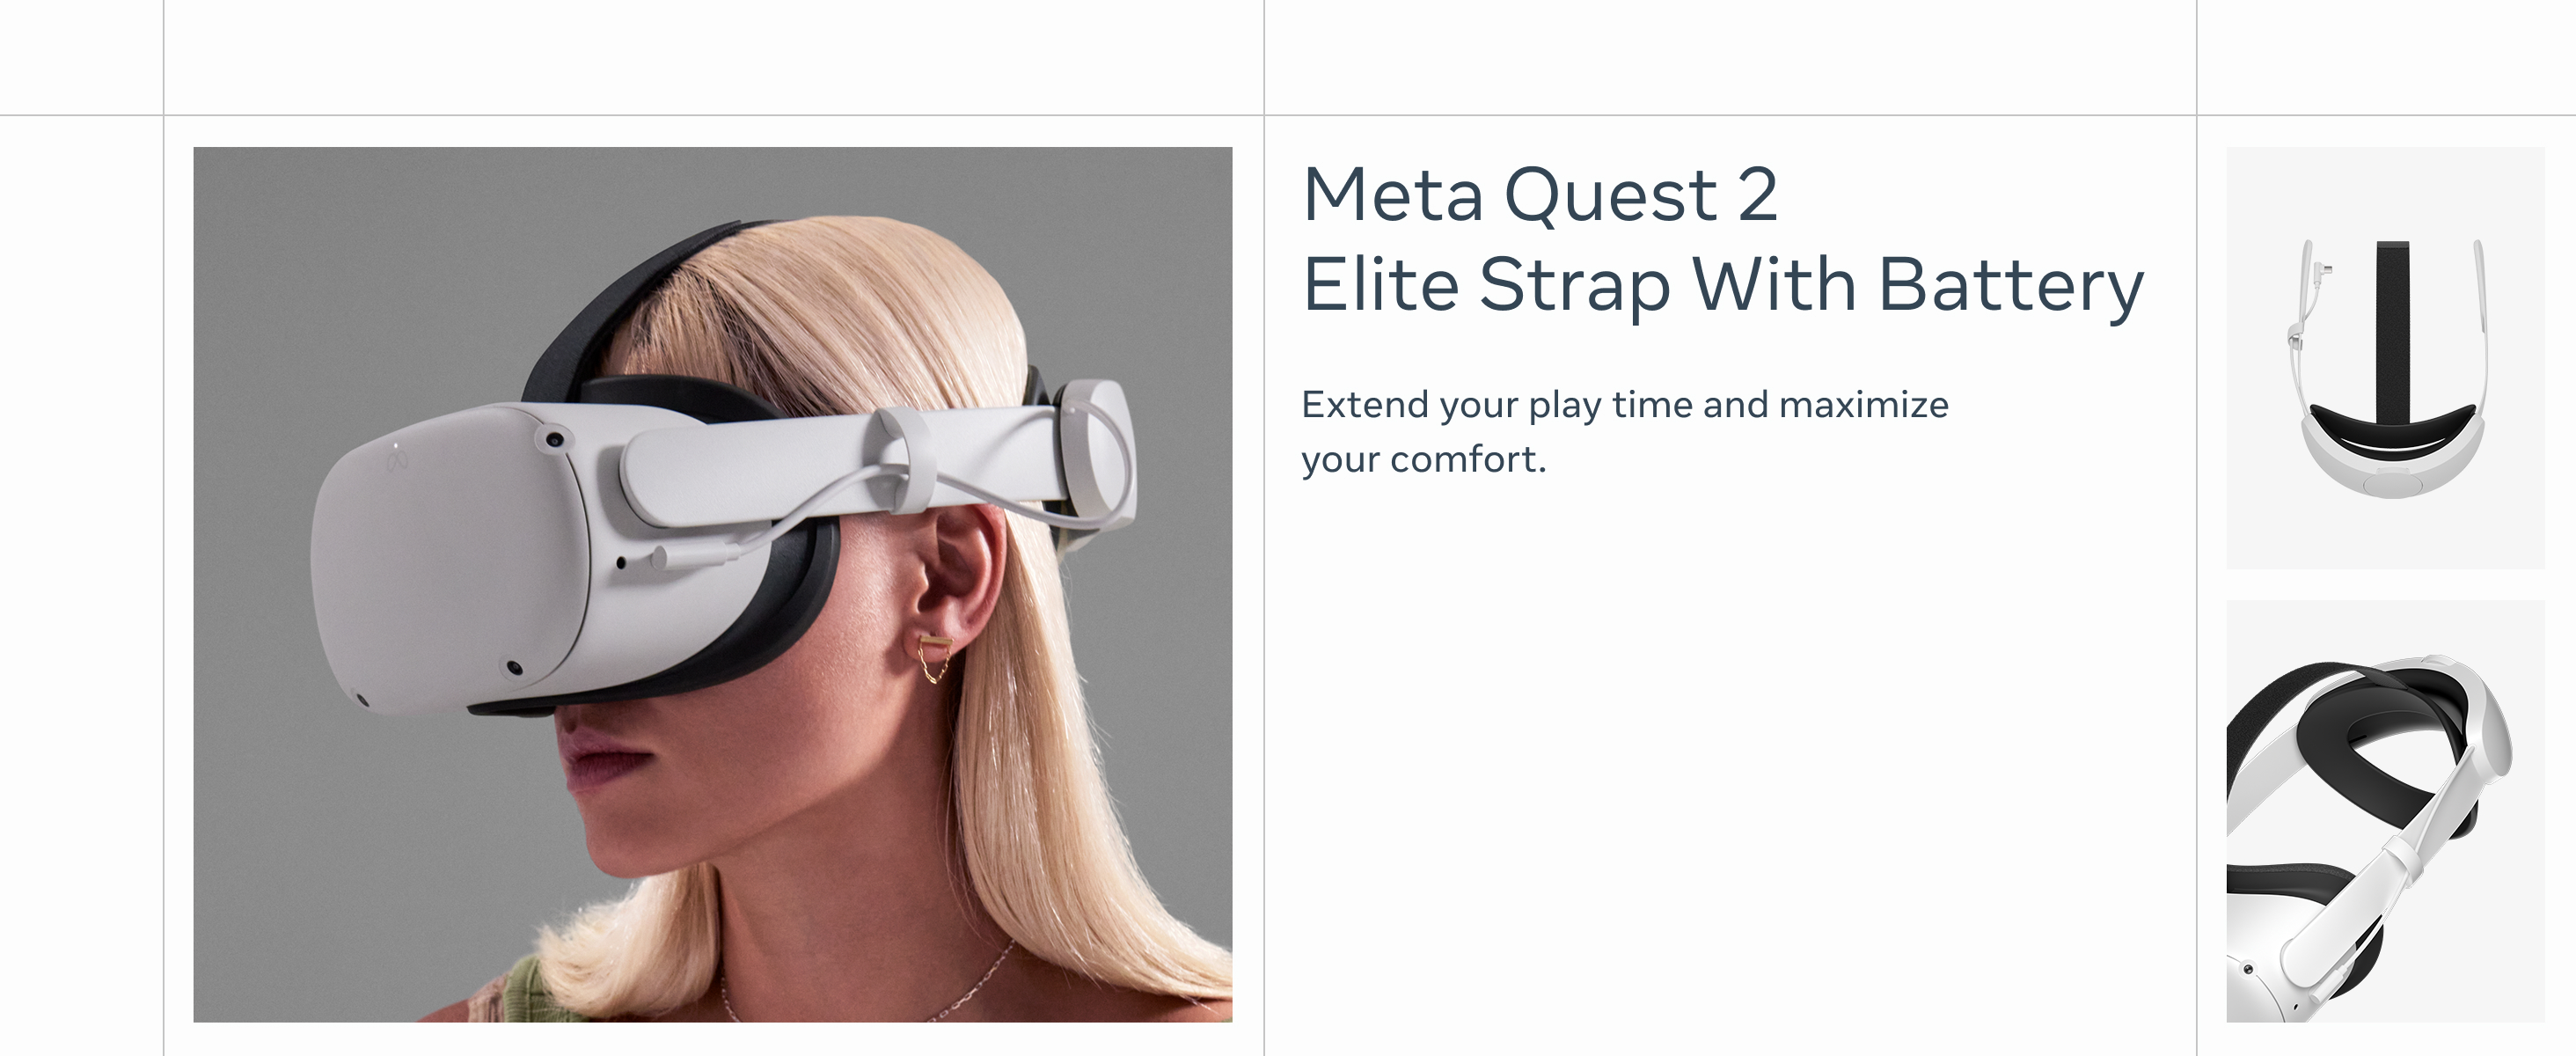 Quest 2 (Oculus) Elite Strap for Enhanced Support and Comfort in